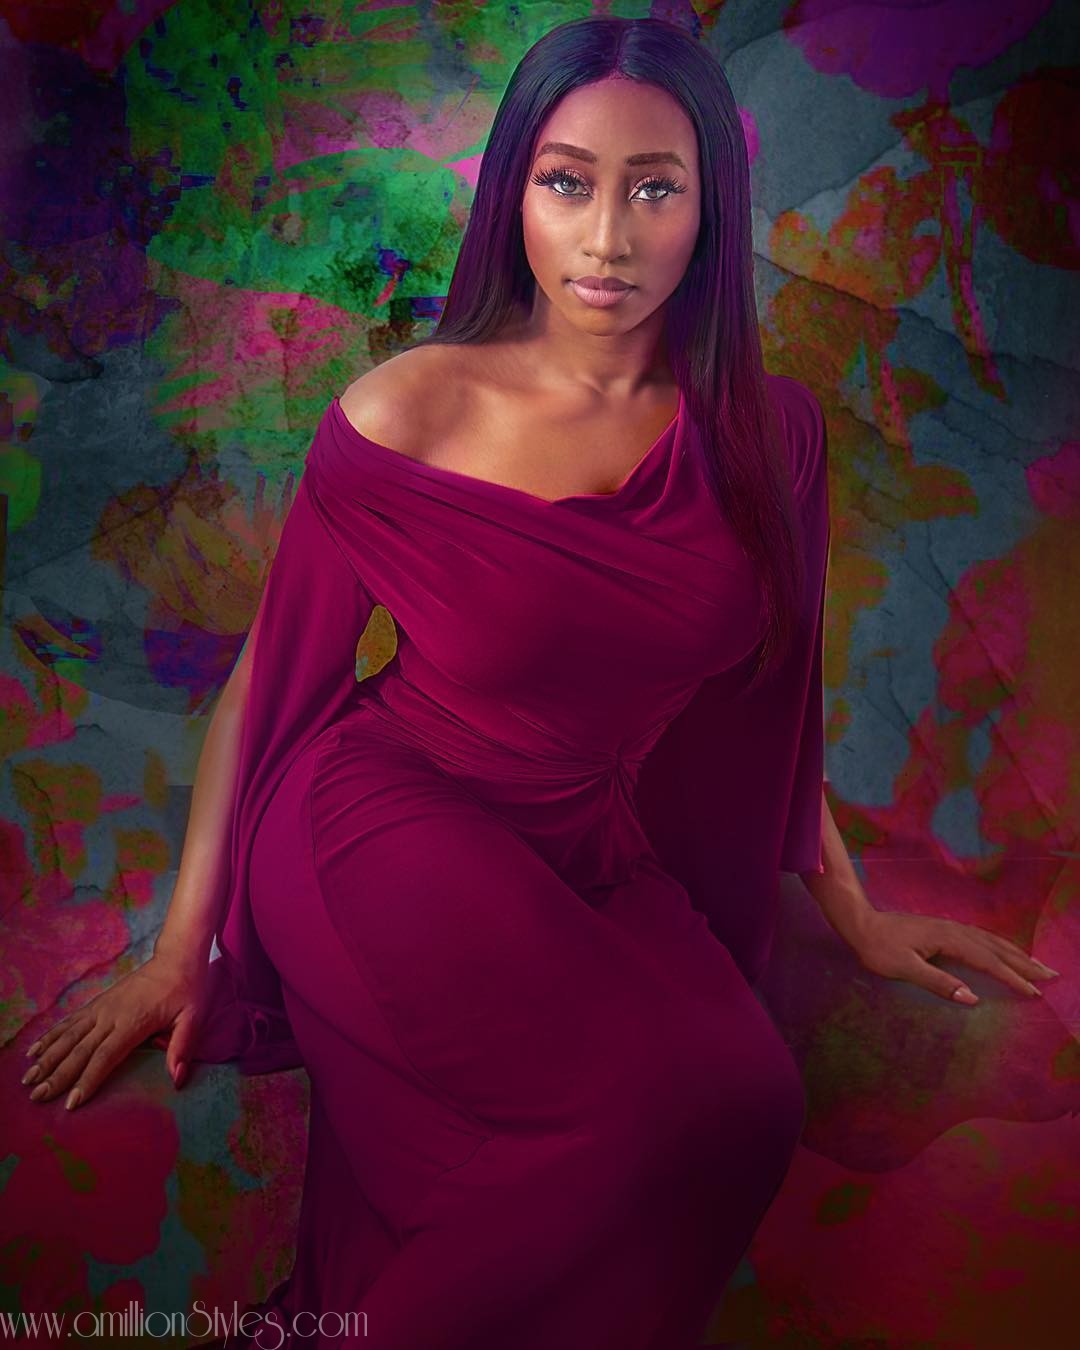 Veronica Odeka Stuns At Forty For ThisDay Style Magazine’s Latest Issue!